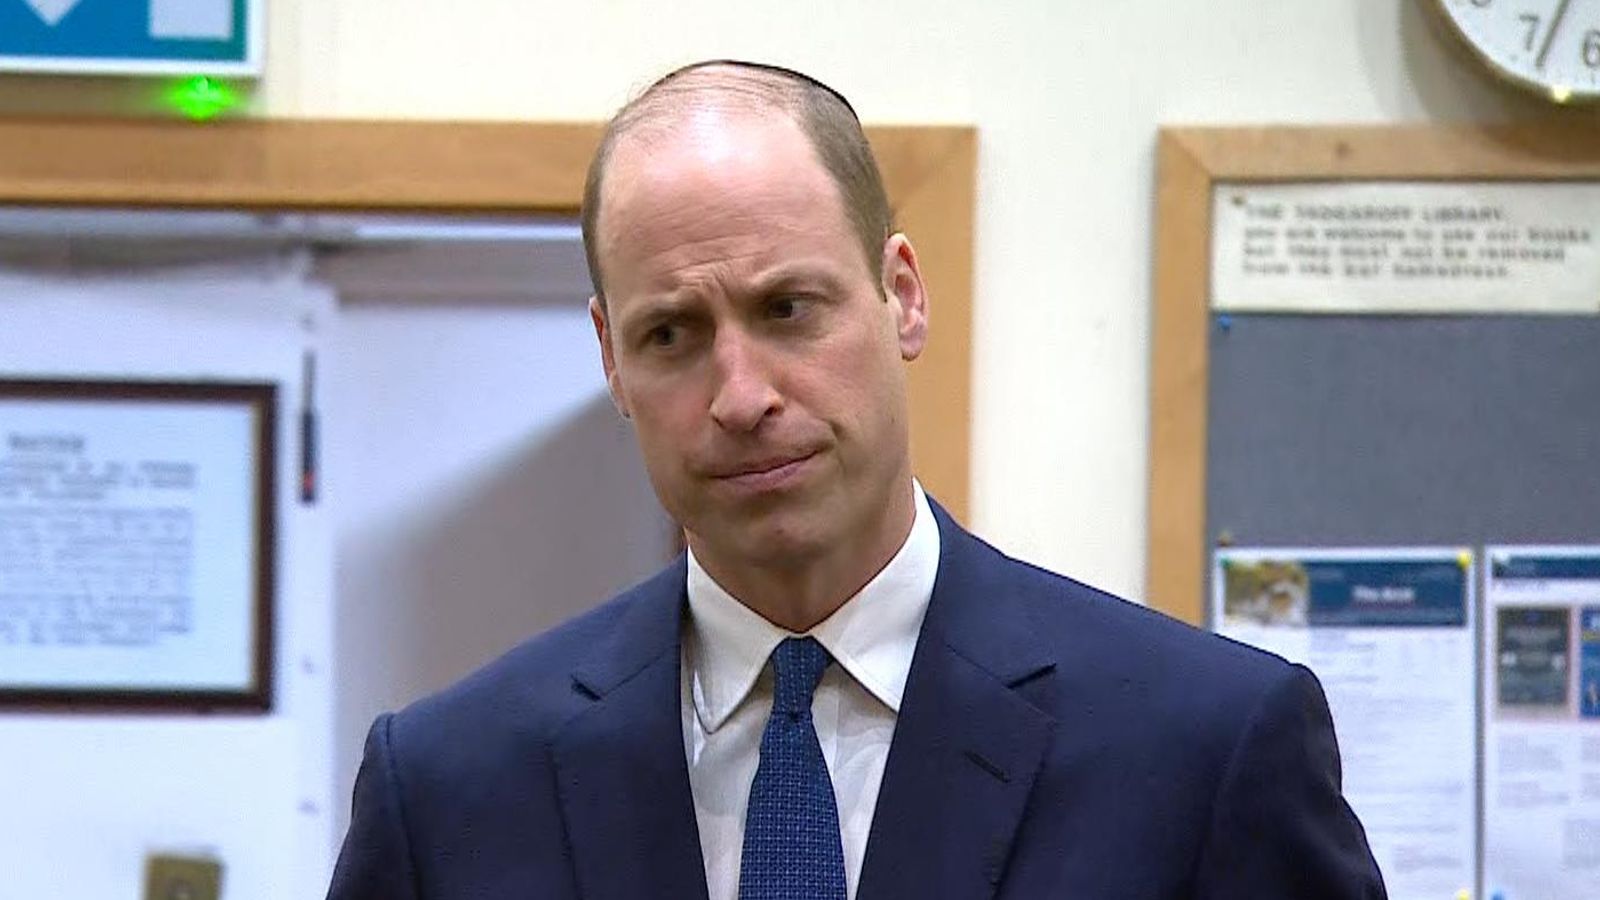 Prince William expresses concern over rise of antisemitism in the UK during visit to Western Marble Arch Synagogue